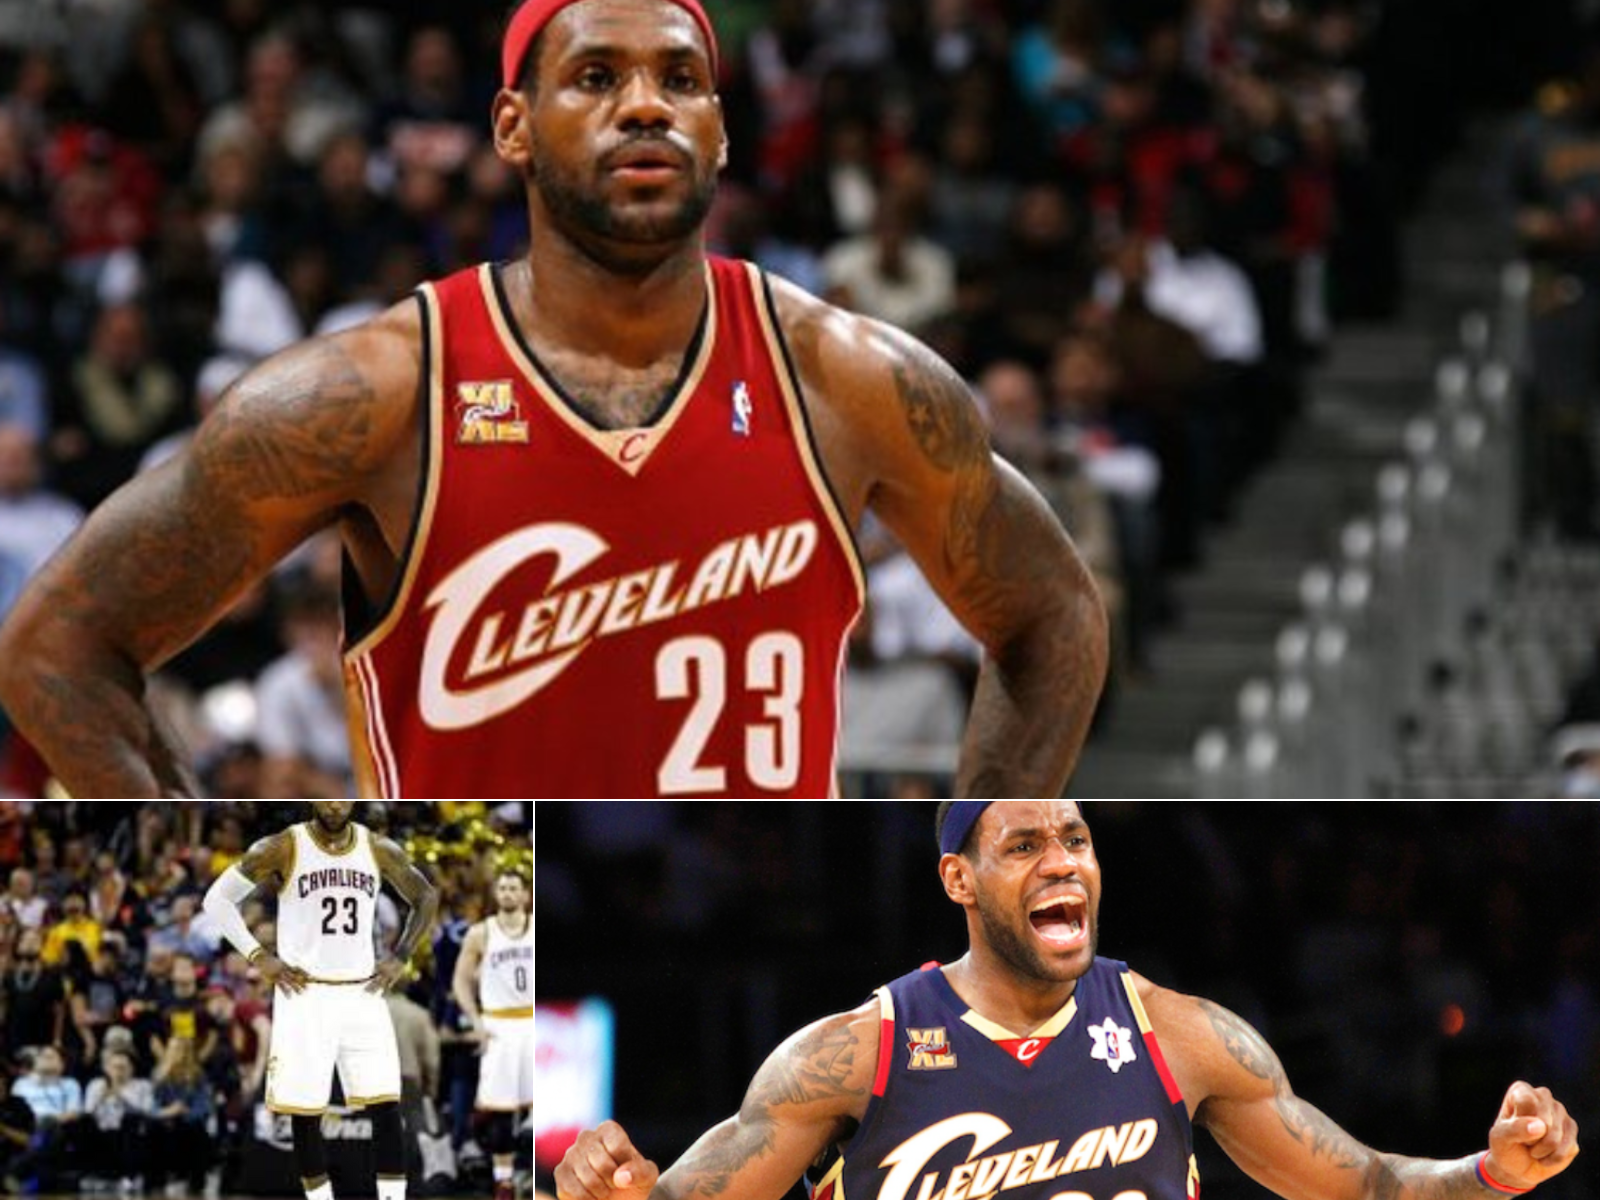 LeBron in 3 pictures wearing different Cavs jerseys.